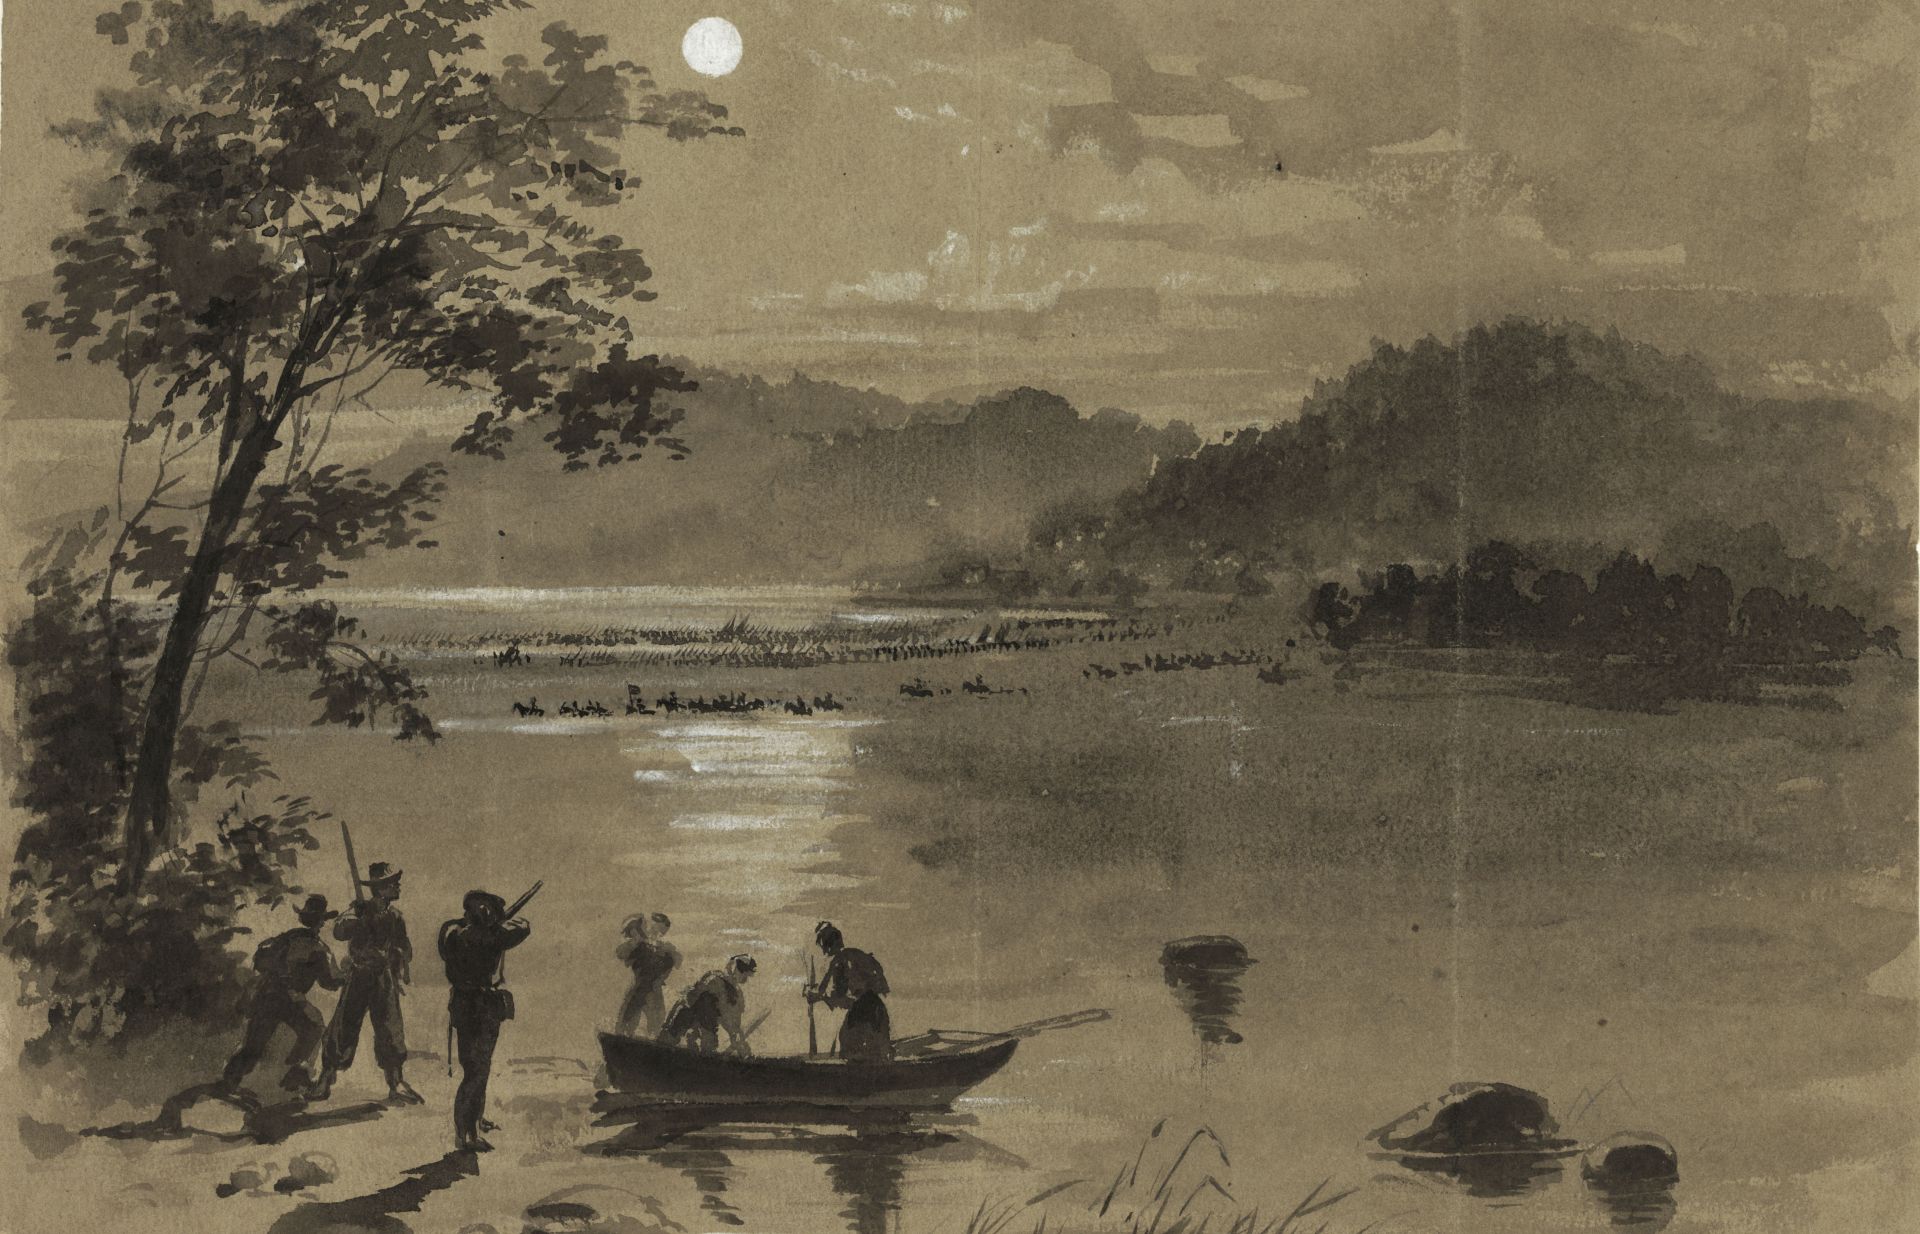 The famed Civil War artist Alfred Waud sketched the Confederate army crossing the Potomac River into Maryland by moonlight.